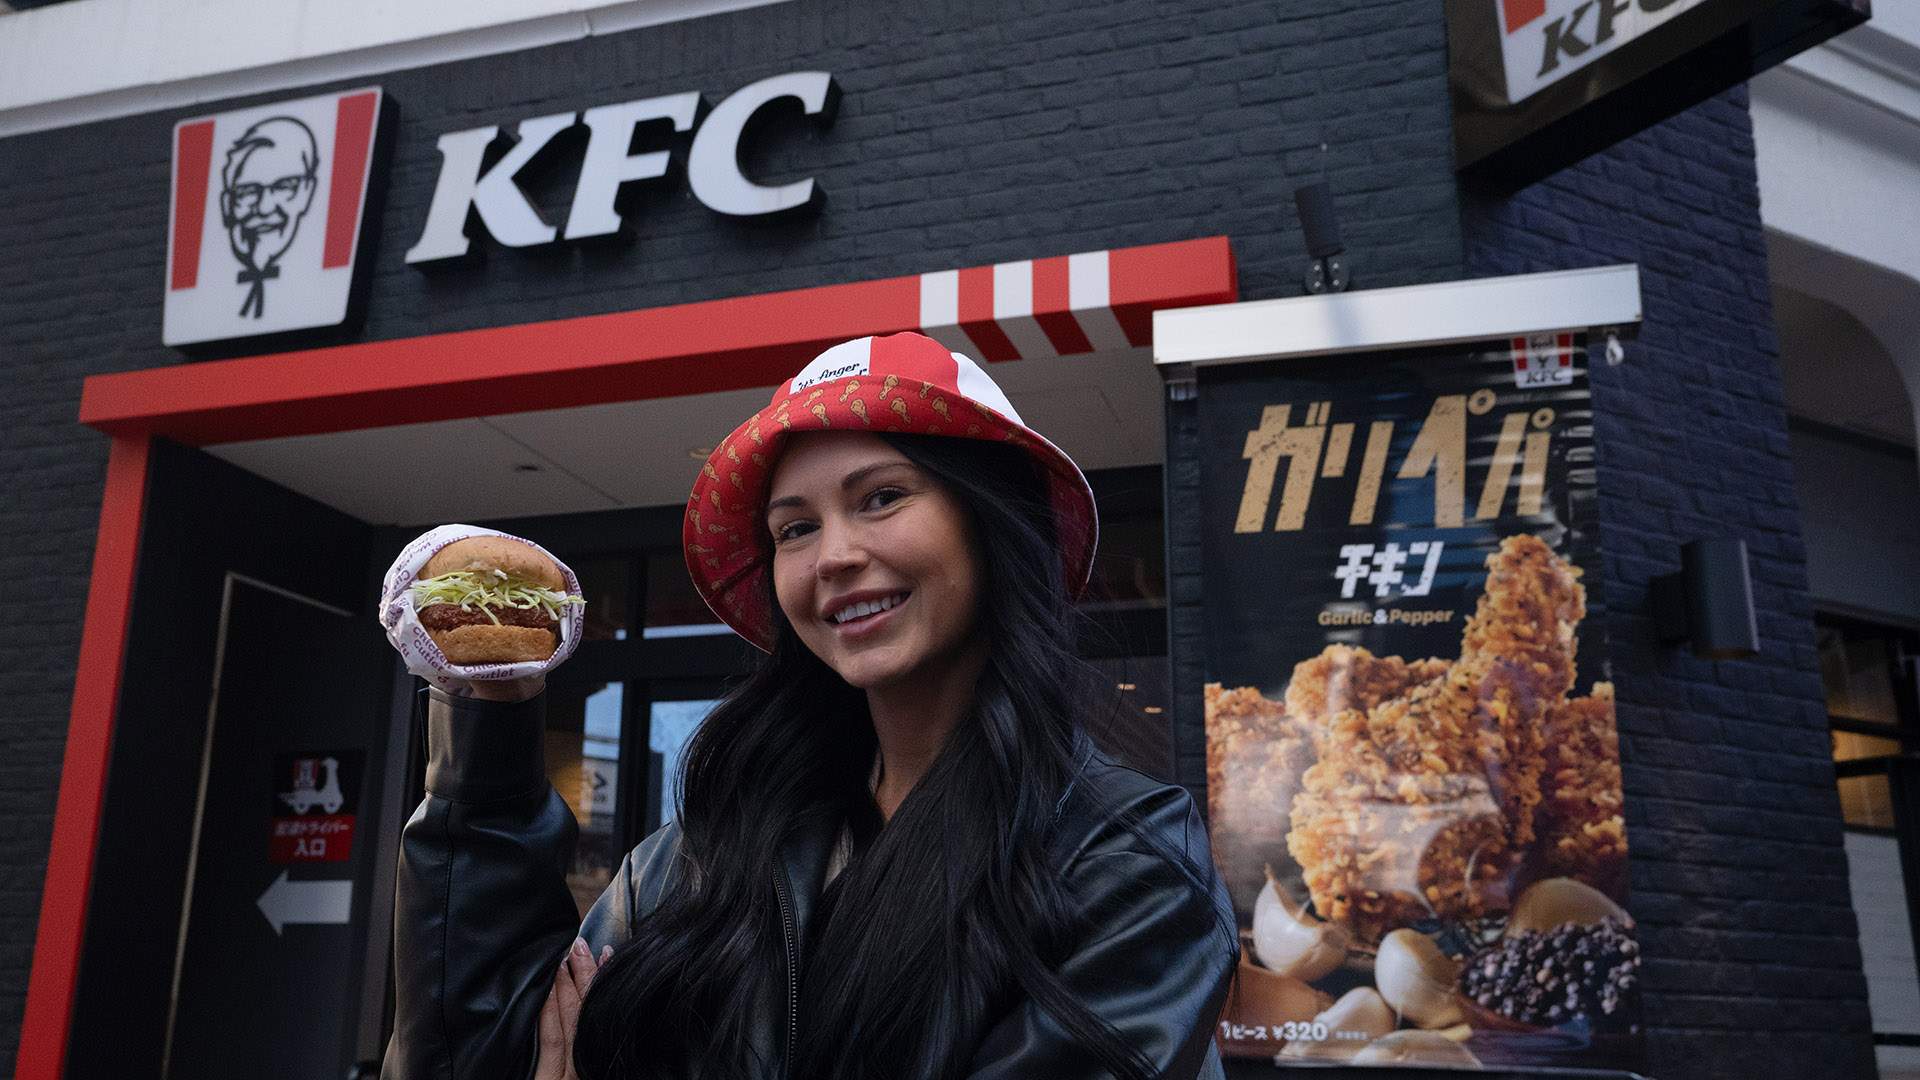 KFC Is Giving Away Free International Trips So You Can Enjoy Its Fried Chicken Around the World